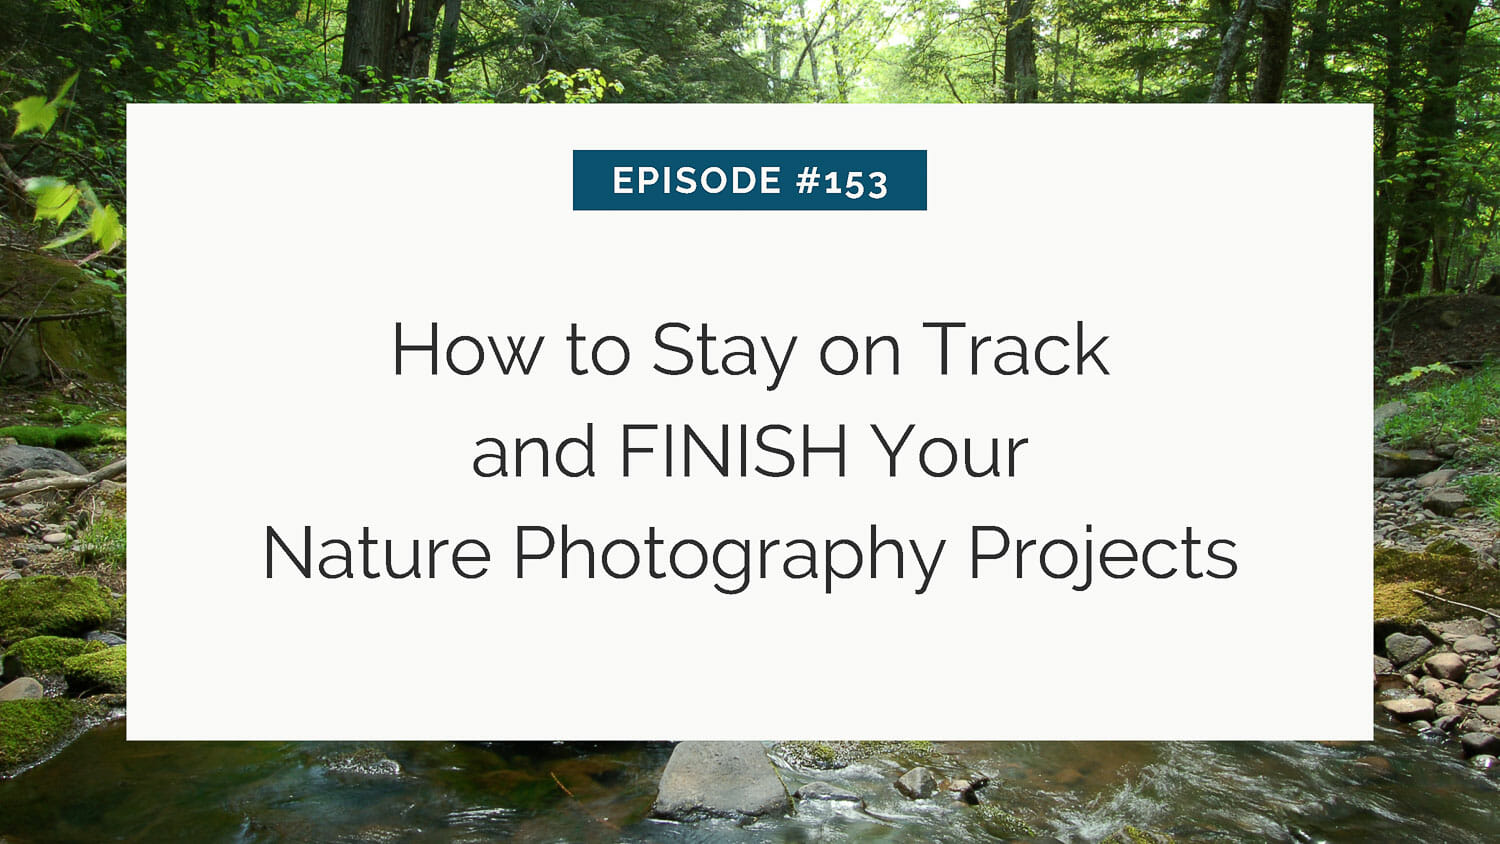 Title slide for a tutorial on completing nature photography projects, episode #153.